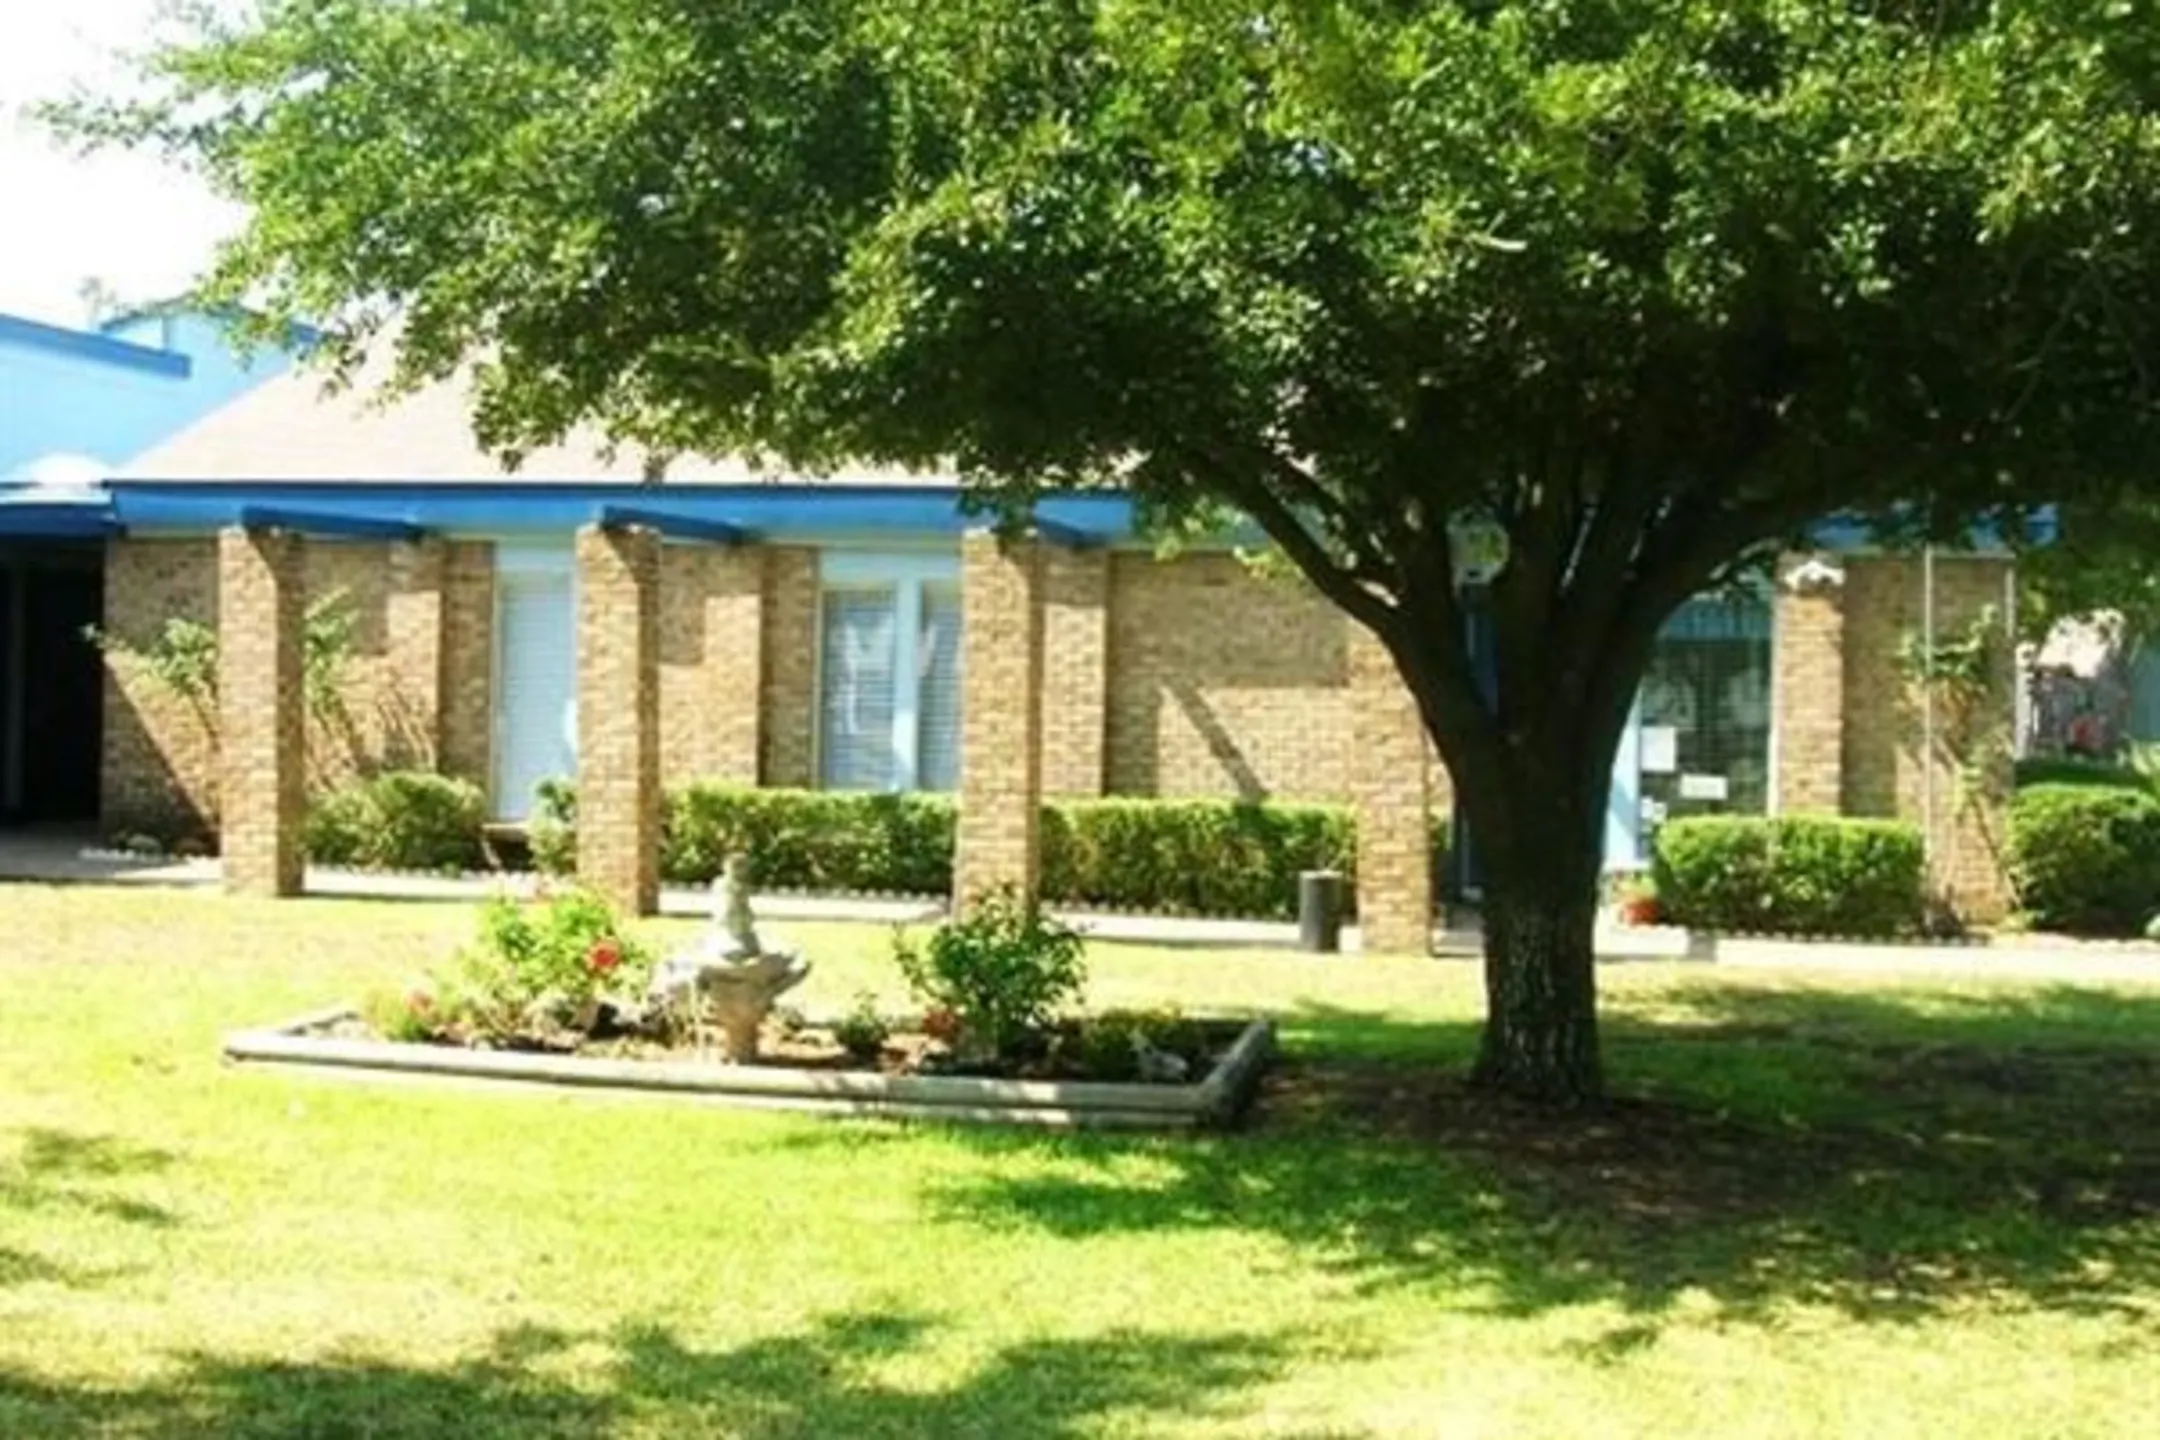 Building - River Oaks Manufactured Home Community - Wilmer, TX